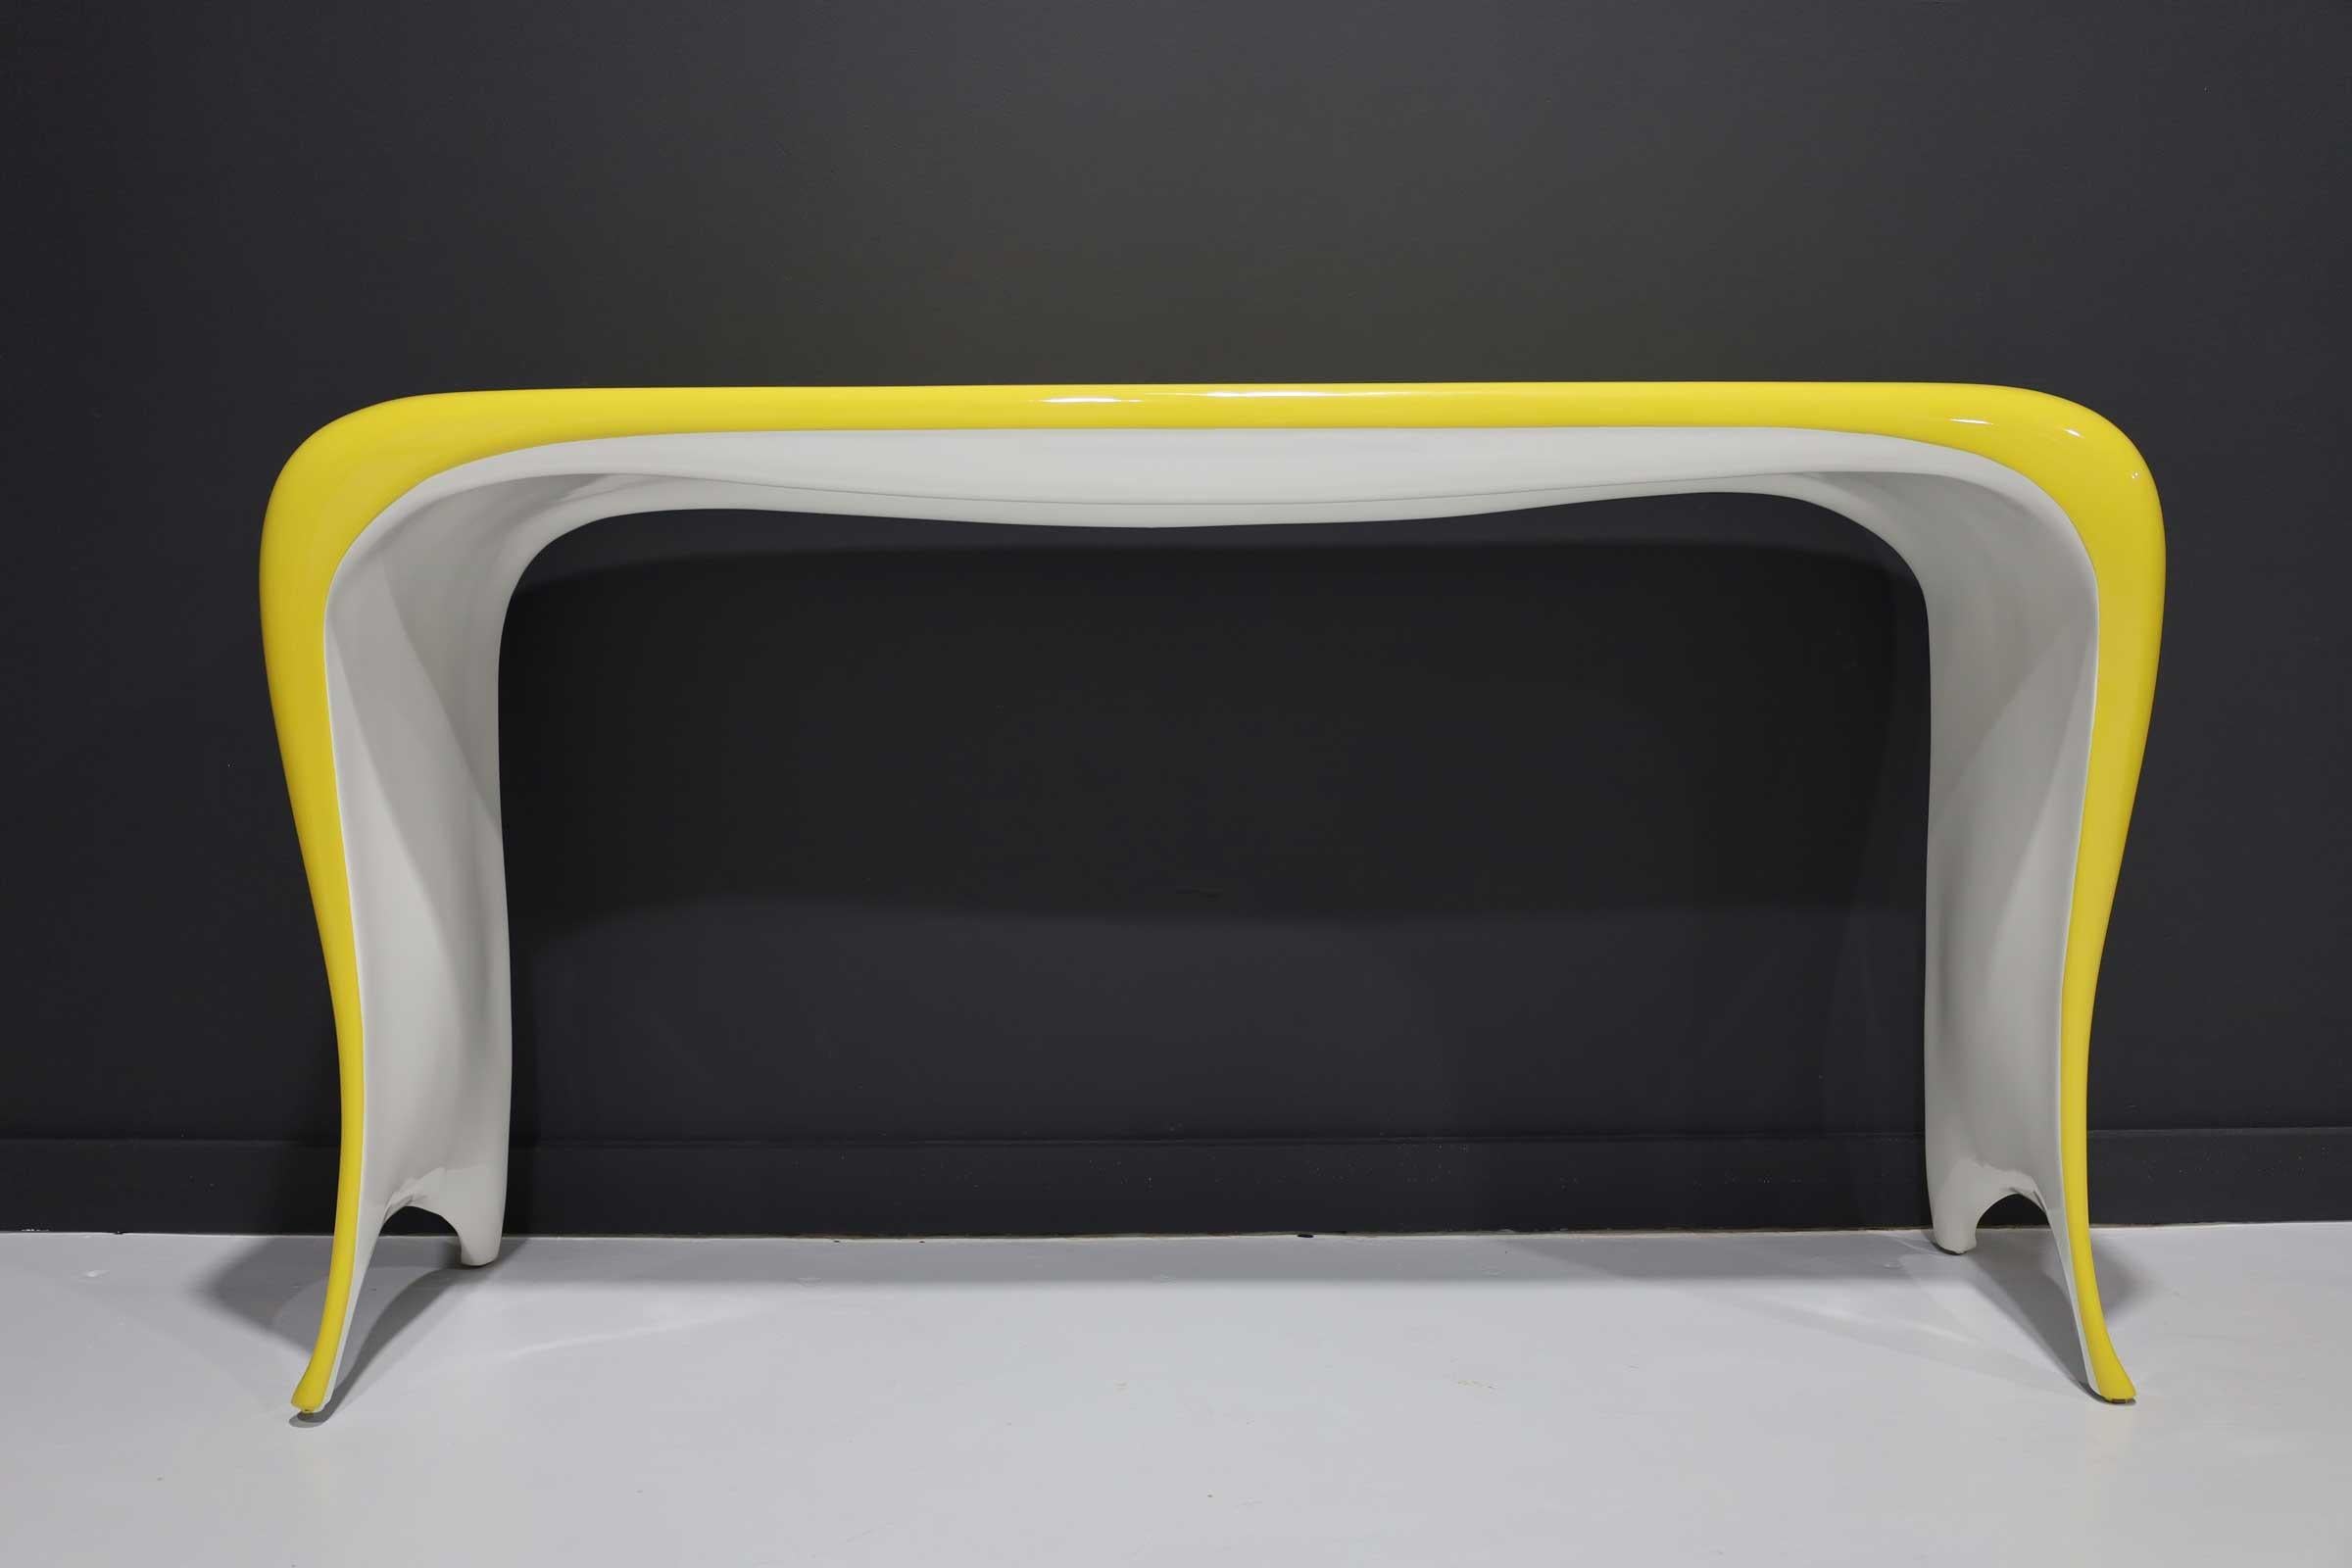 Undulating lines, soft edges and a base that appears to float, the Goddess Console by Bruce Berman. Lacquered in a high gloss yellow with a white interior.